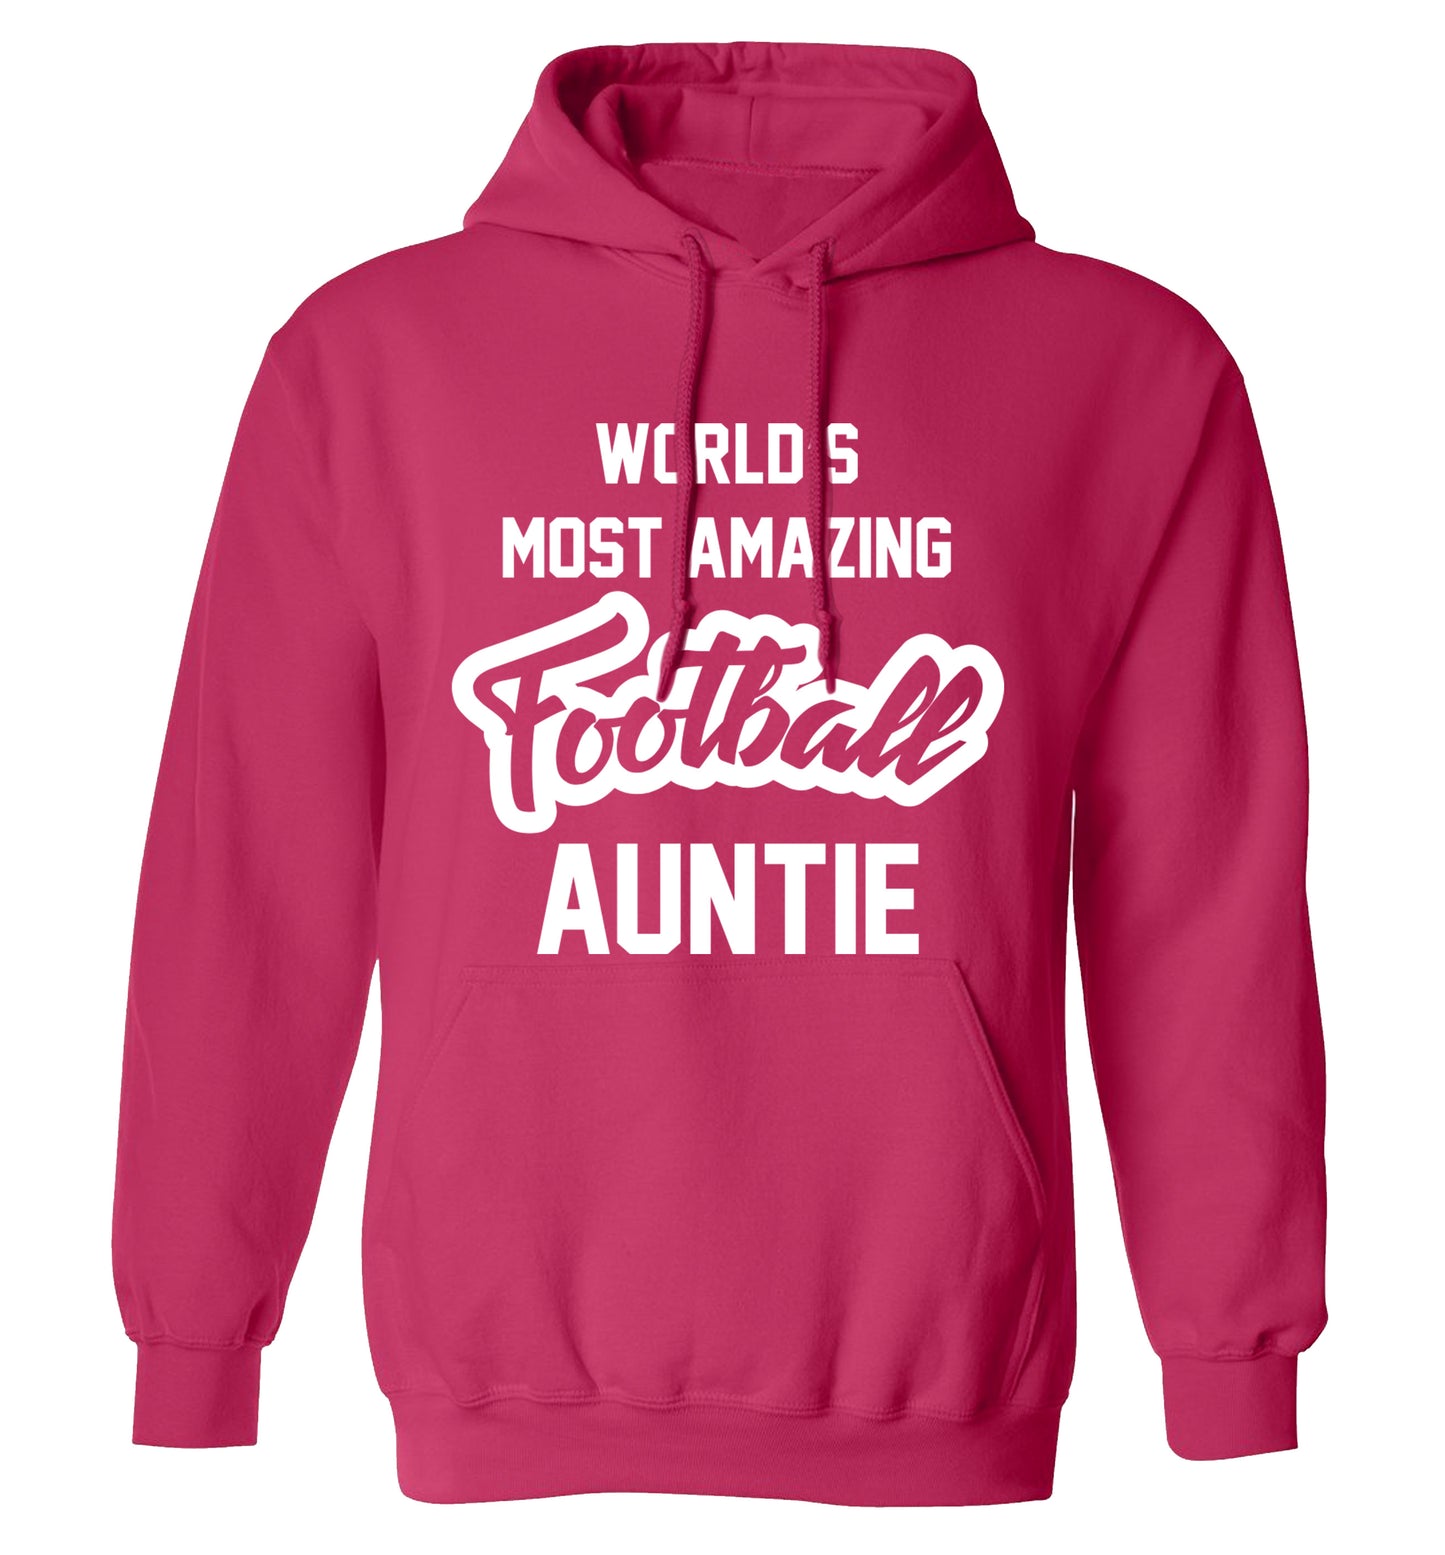 Worlds most amazing football auntie adults unisexpink hoodie 2XL